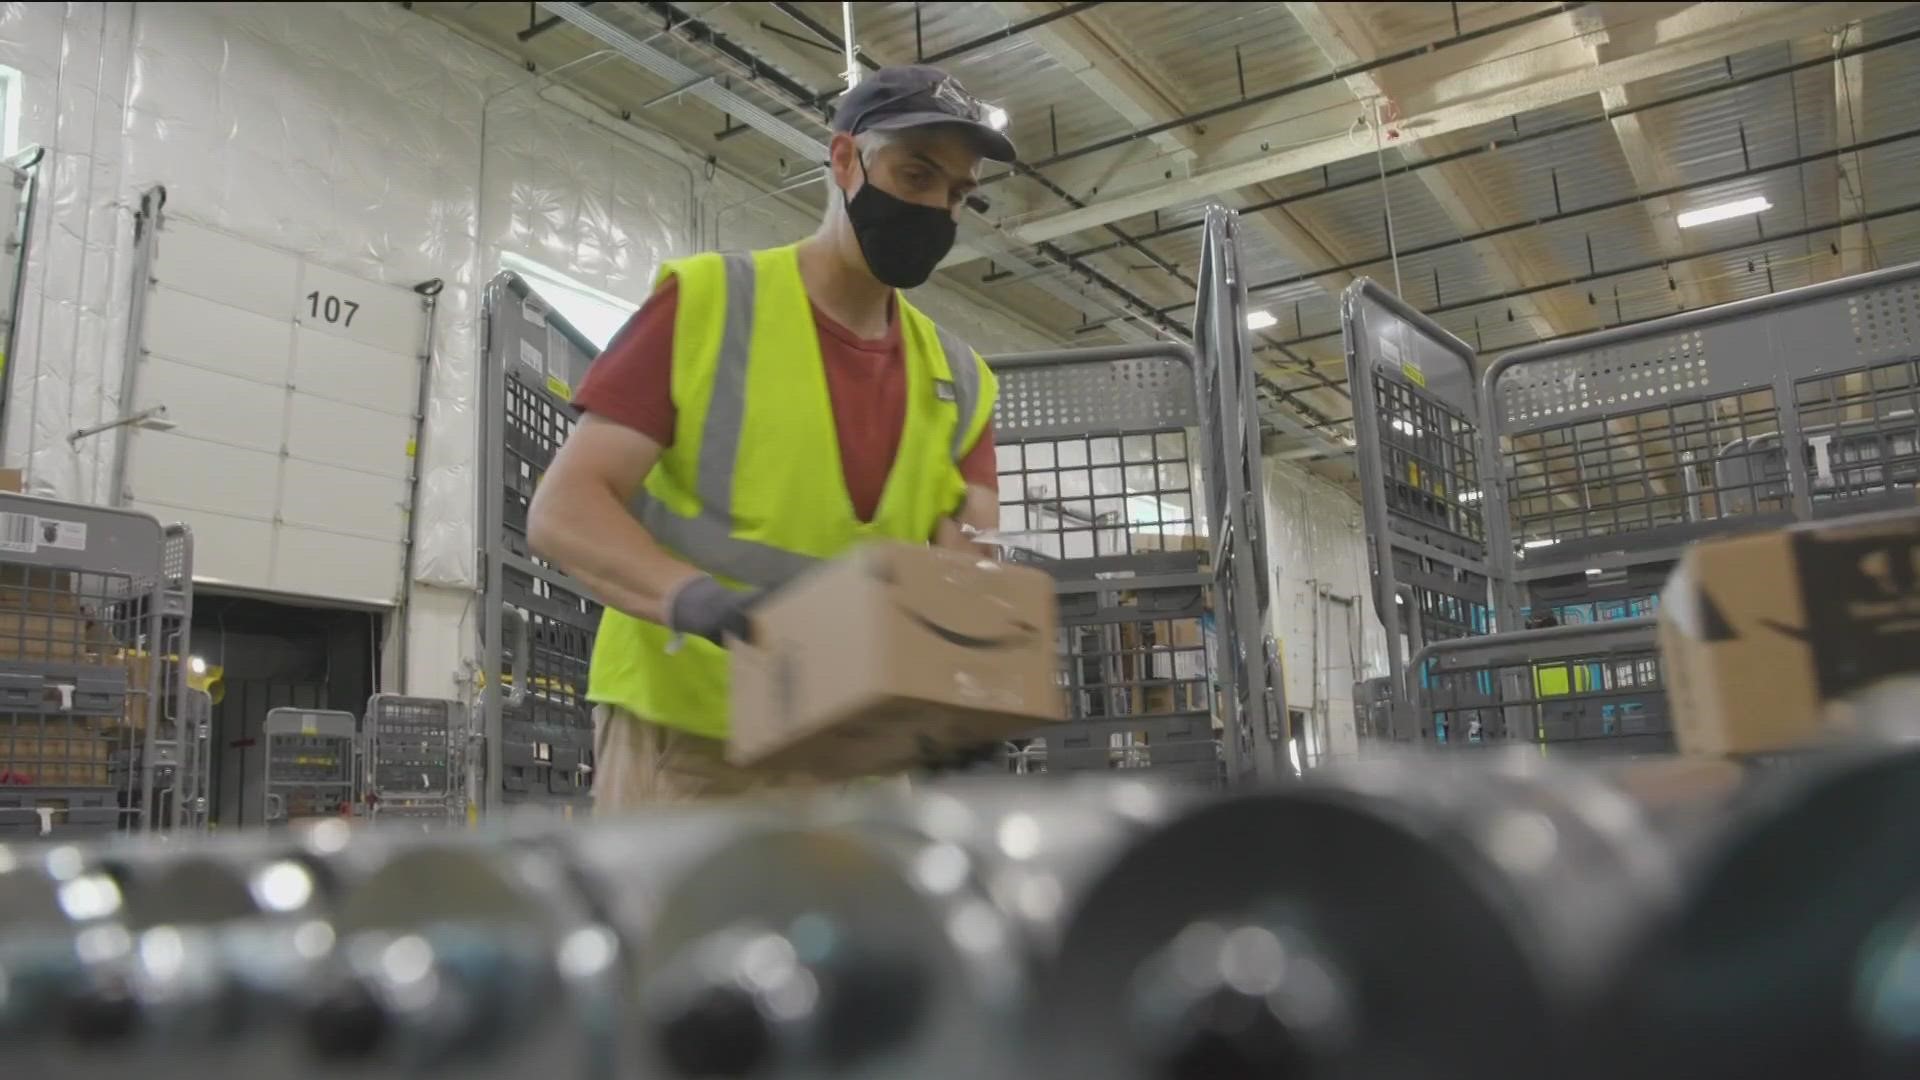 The U.S. Department of Labor says the Nampa facility is one of three Amazon warehouses where workers were exposed to unsafe conditions, high injury risk.